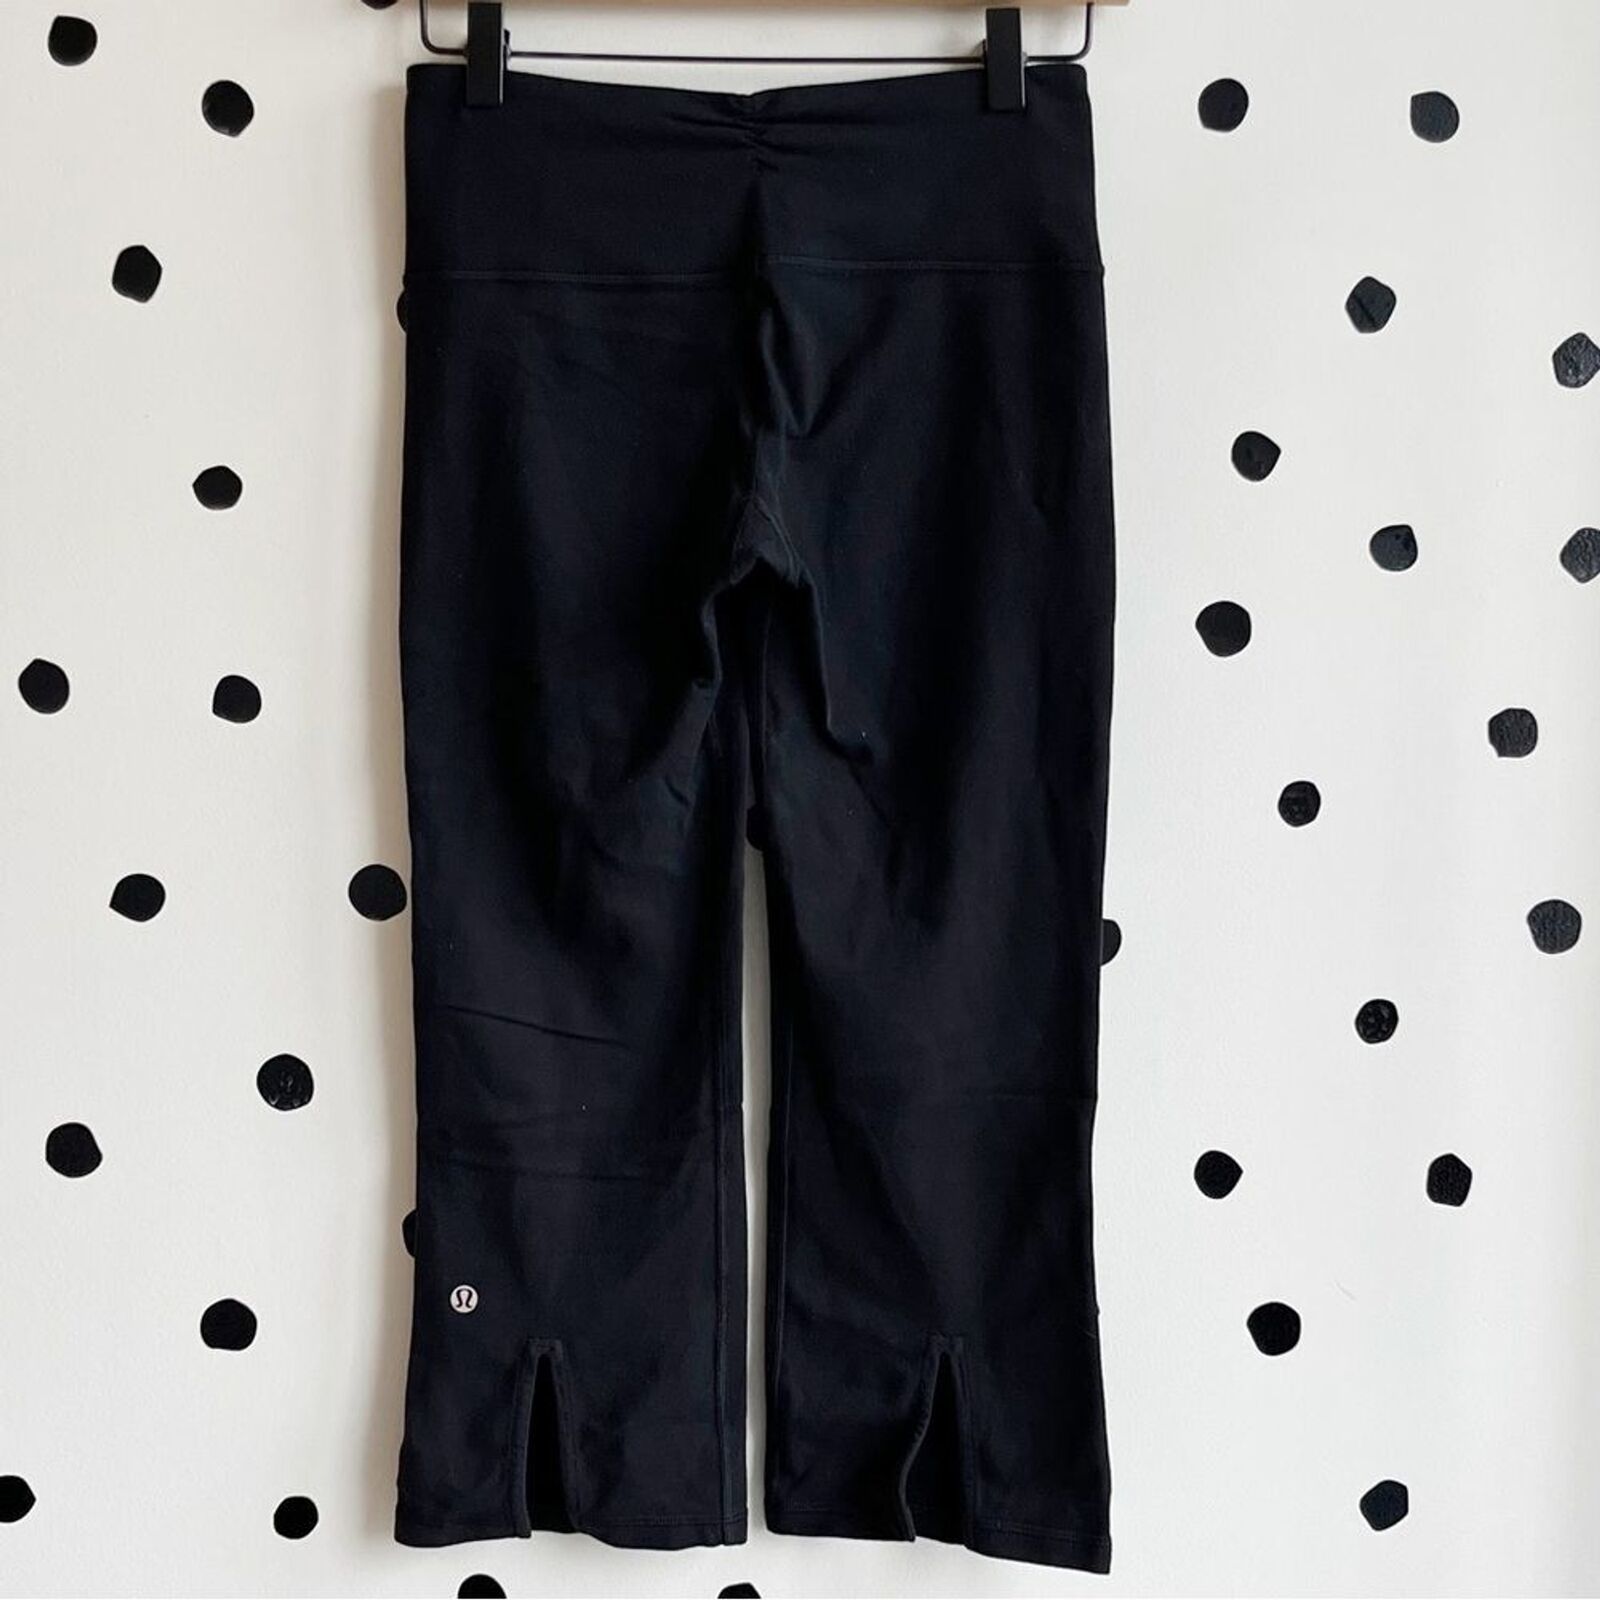 Lululemon Athletica Gather and Grow Crop and 11 similar items